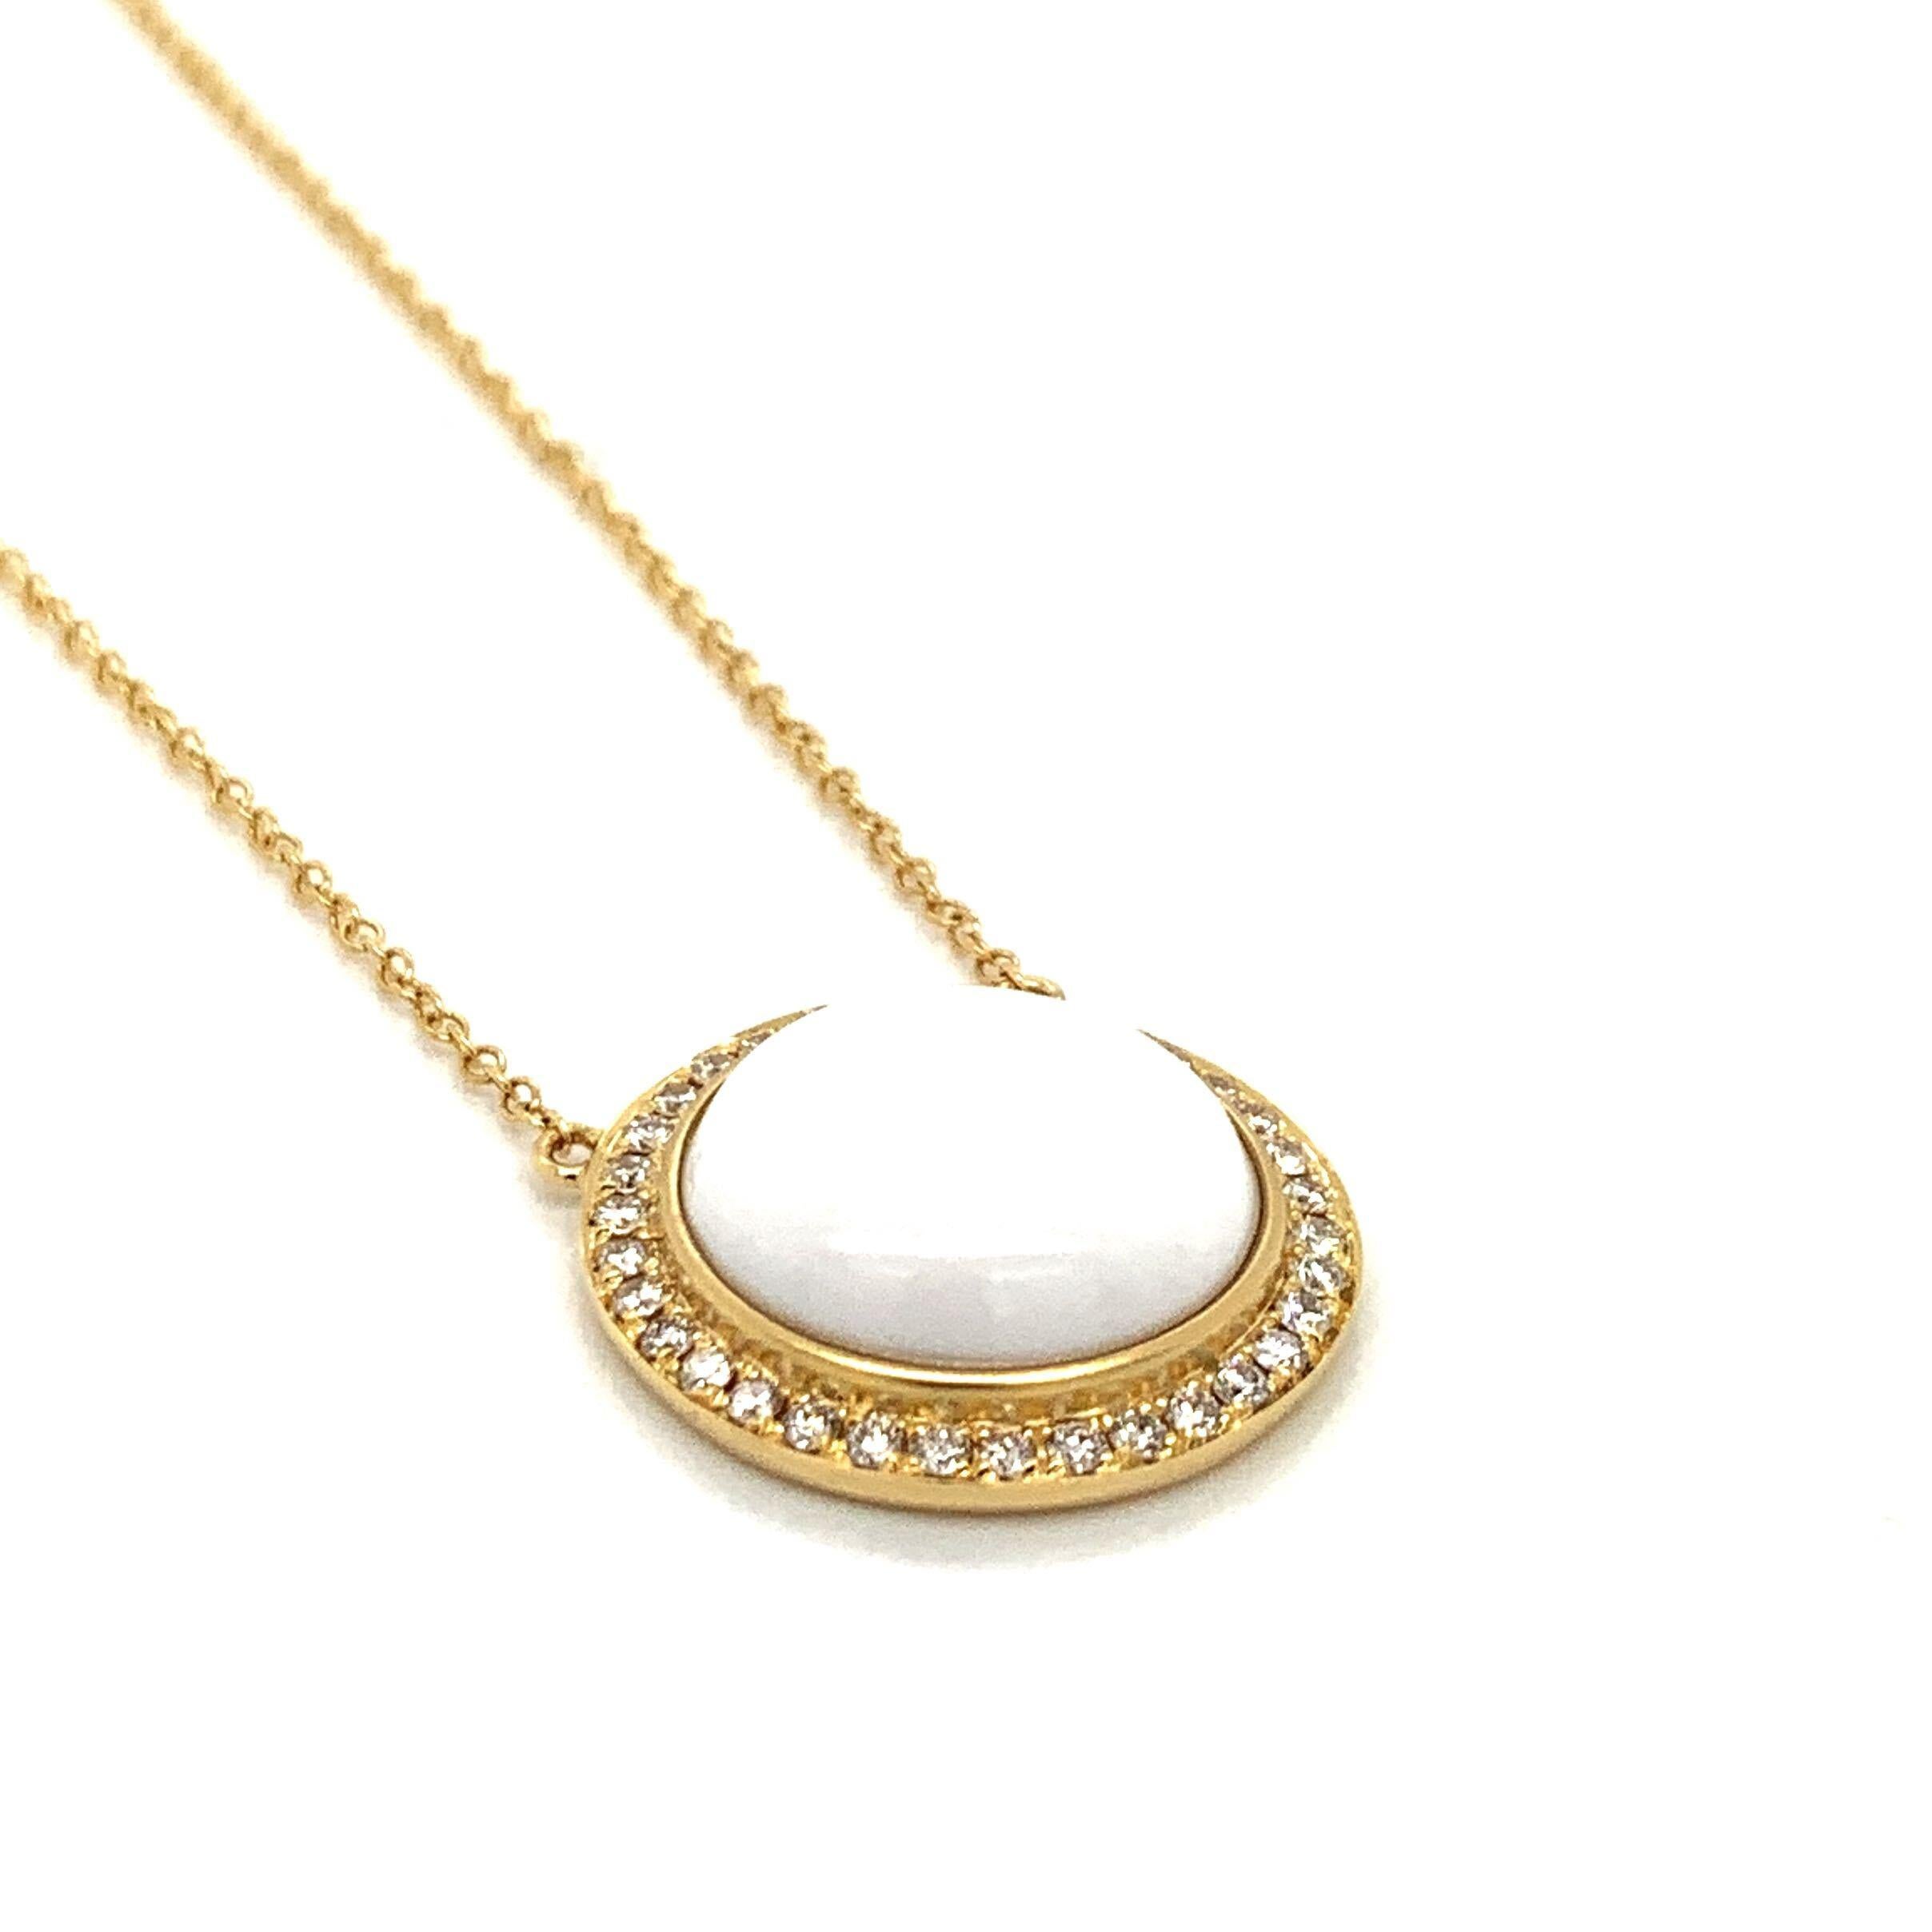 Doves 18 Karat Gold Necklace with Round Cabochon-Cut White Agate and Diamonds In New Condition For Sale In Great Neck, NY